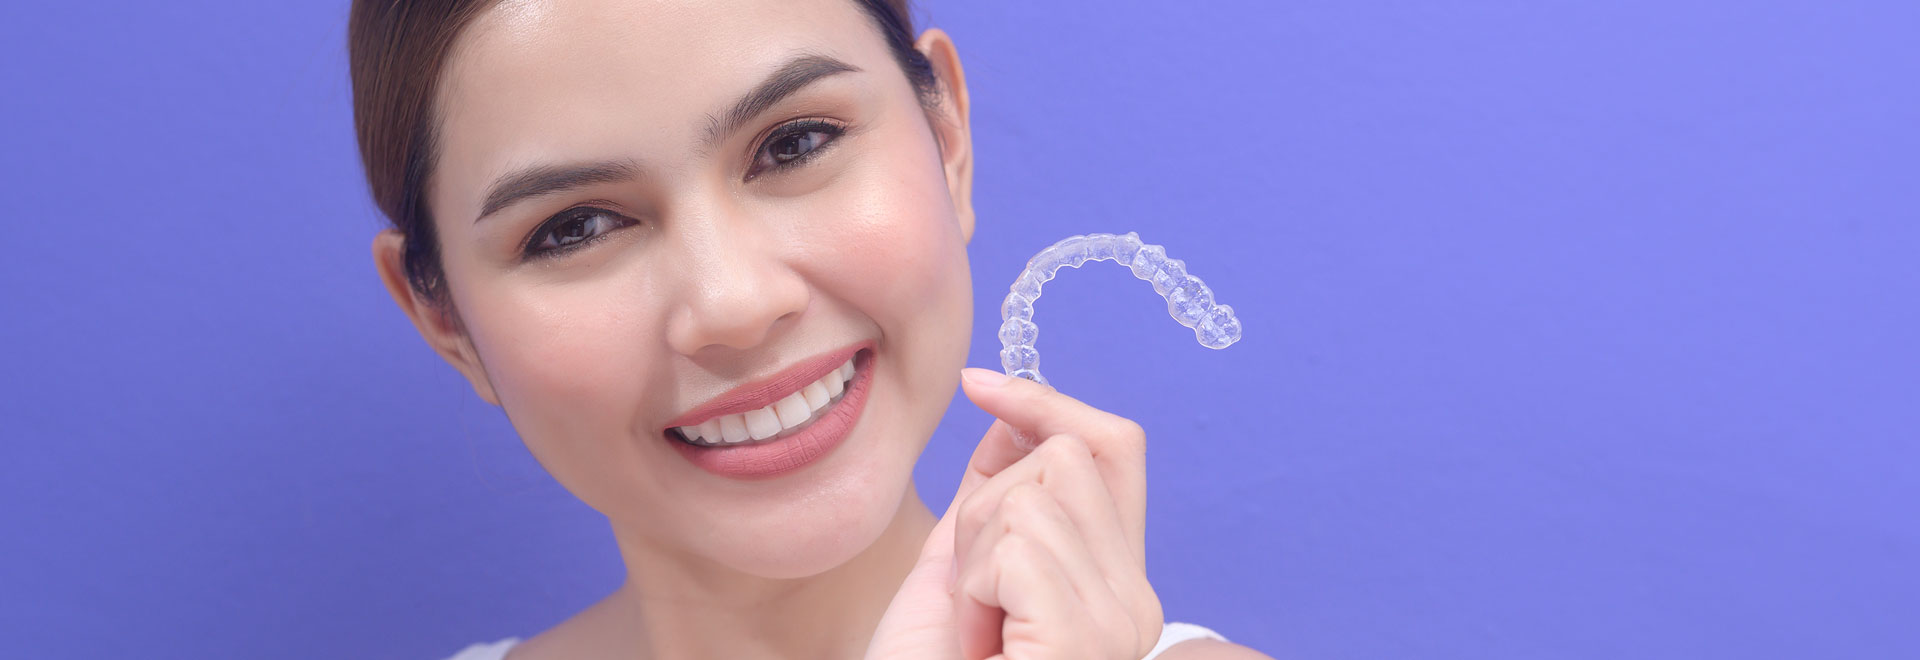 A young woman holding invisalign braces